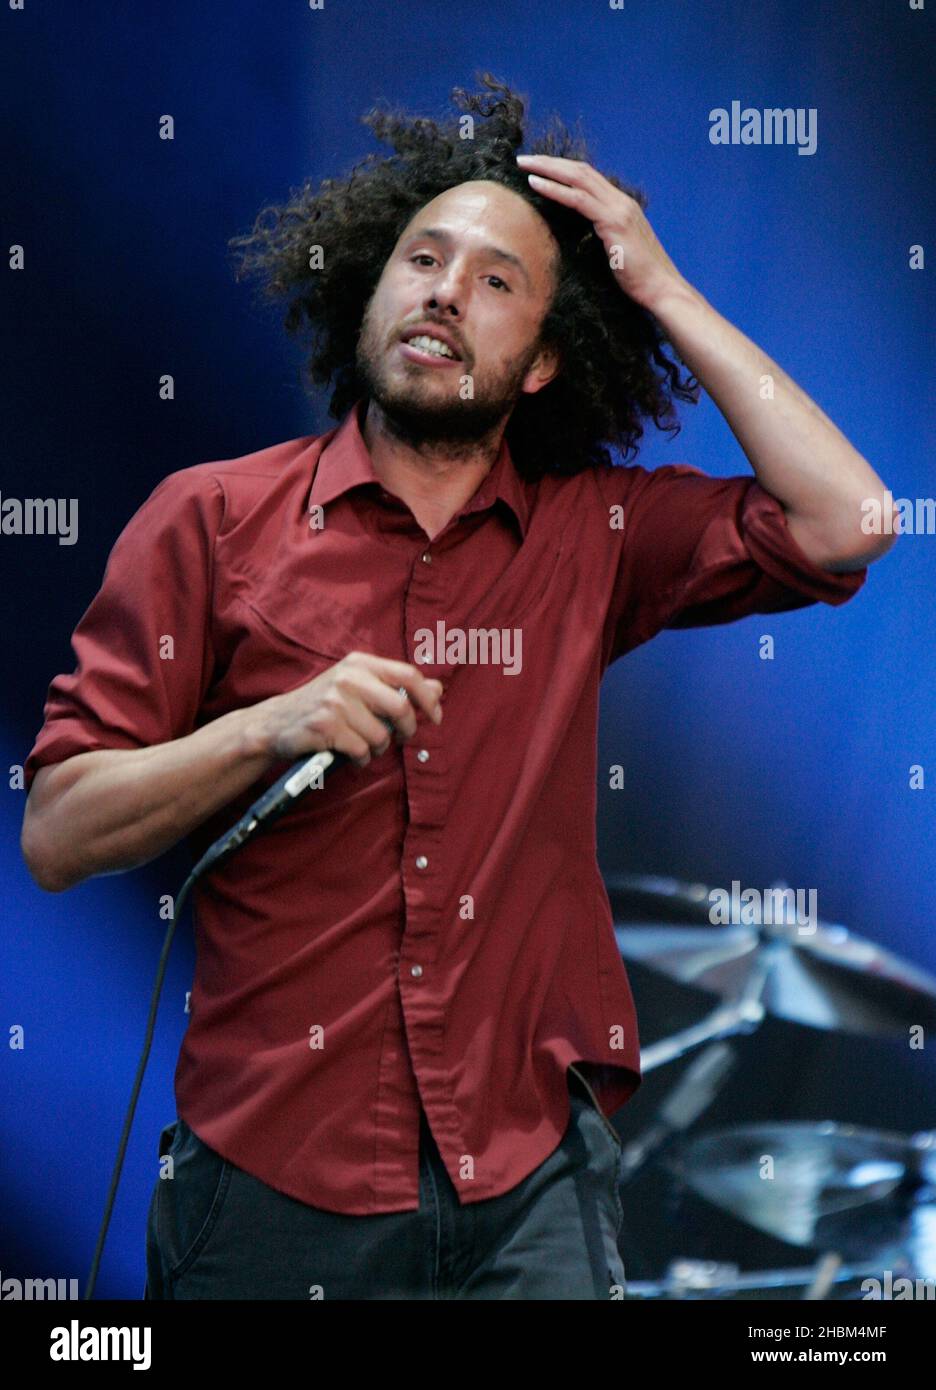 Zack de la Rocha of Rage Against the Machine performs on stage at during day 2 at the 2010 Download Festival in Castle Donnington, Leicestershire. Stock Photo